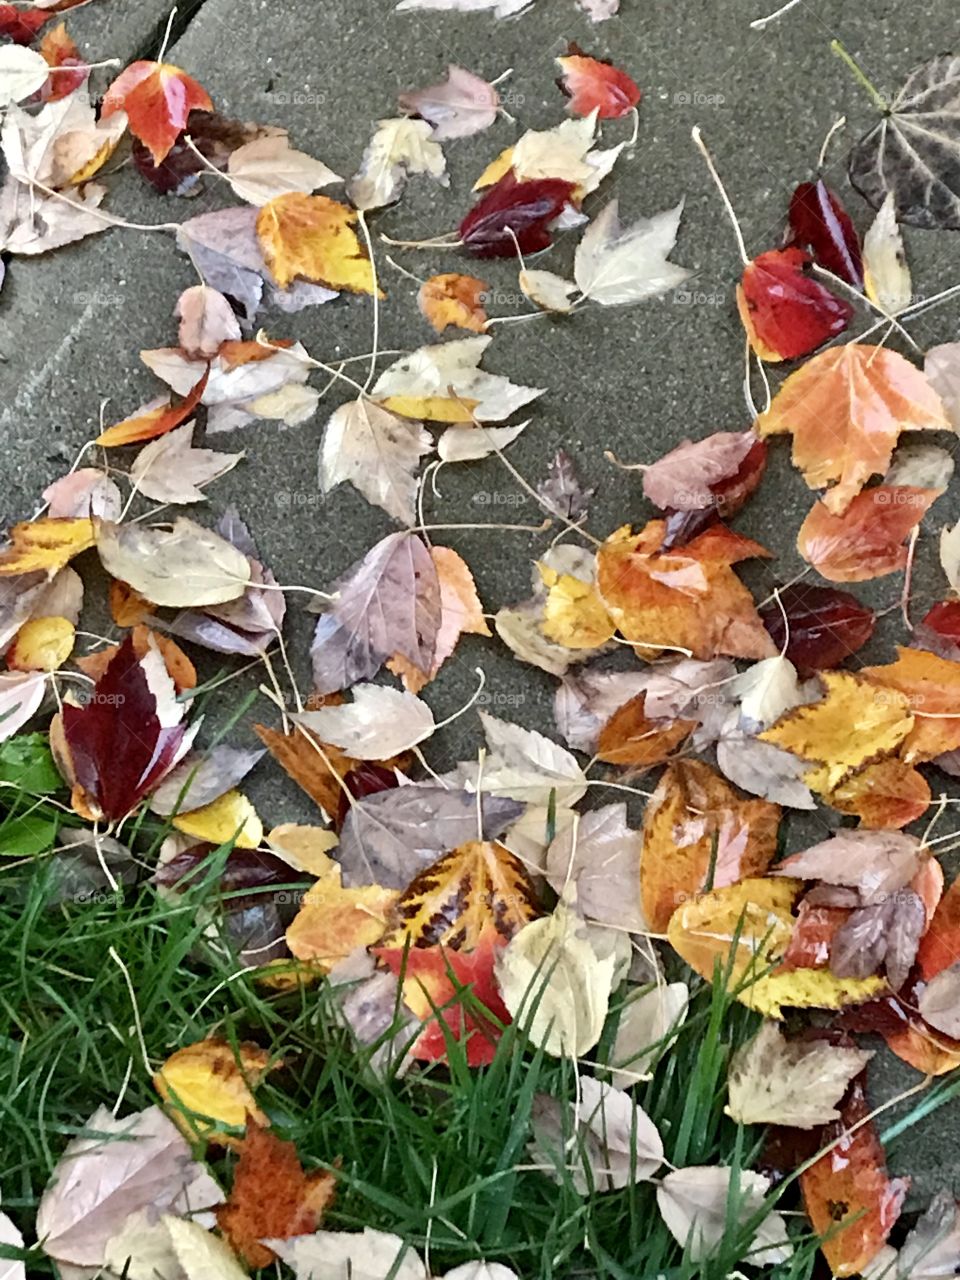 Fallen leaves on a rainy fall morning 